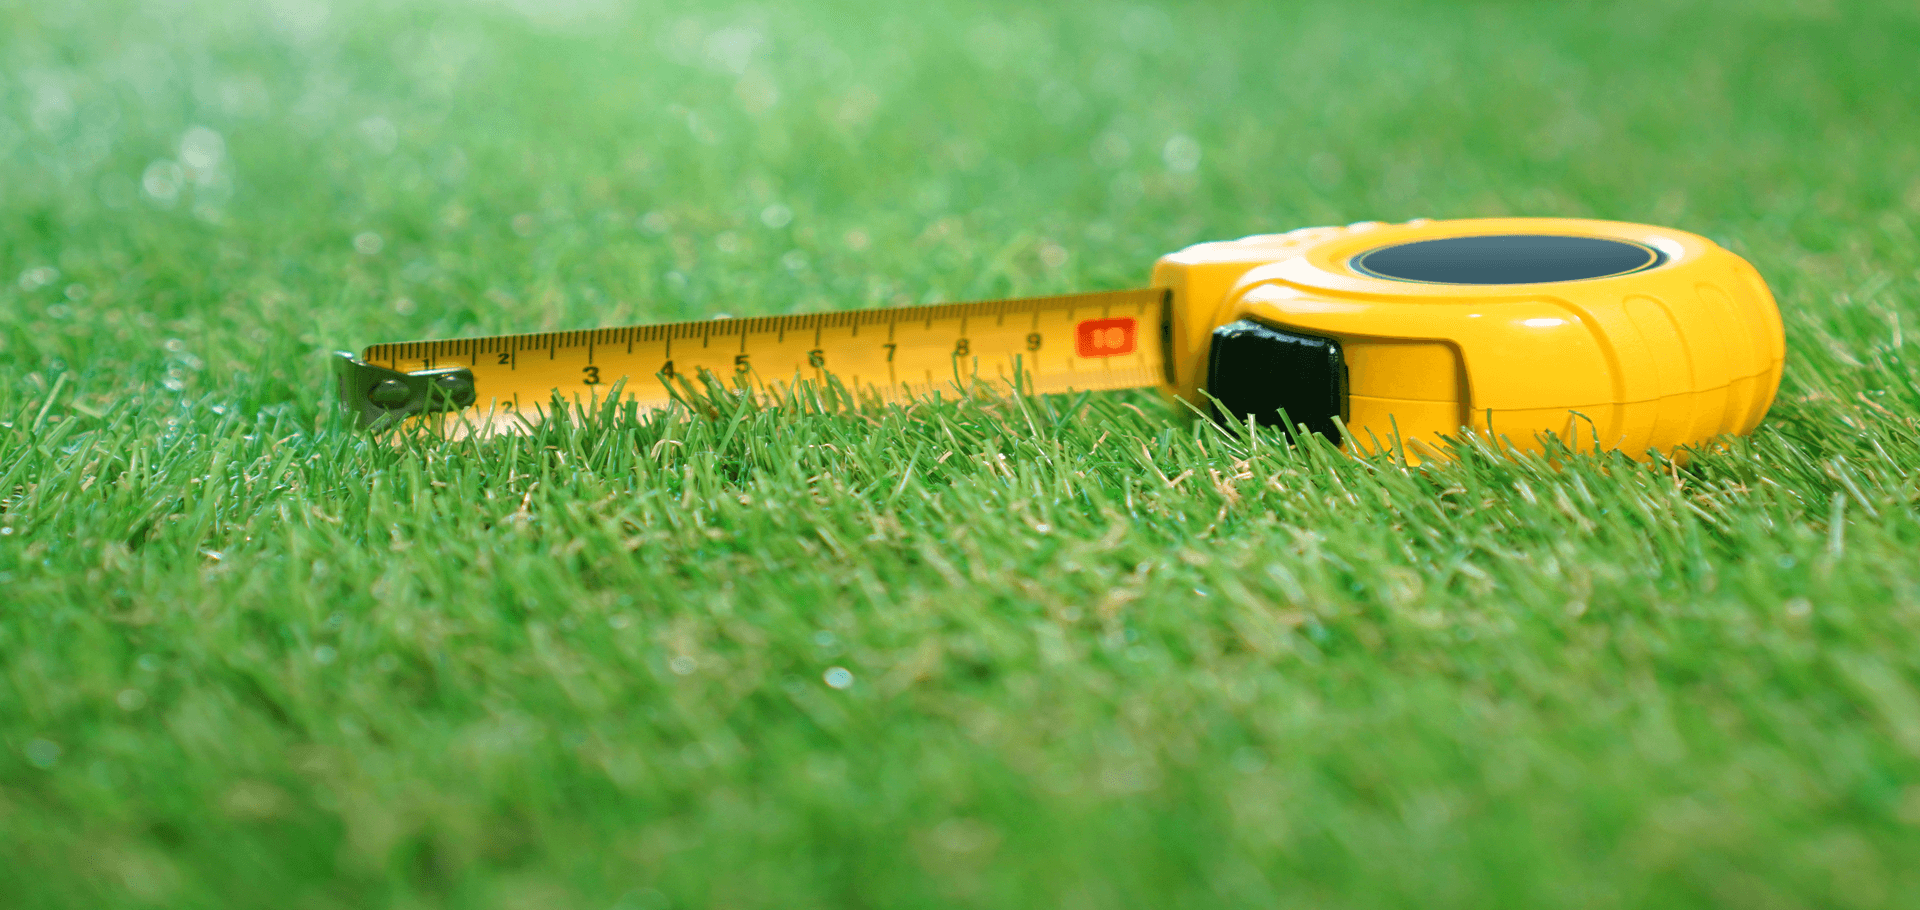 How to measure your lawn for fertilizer